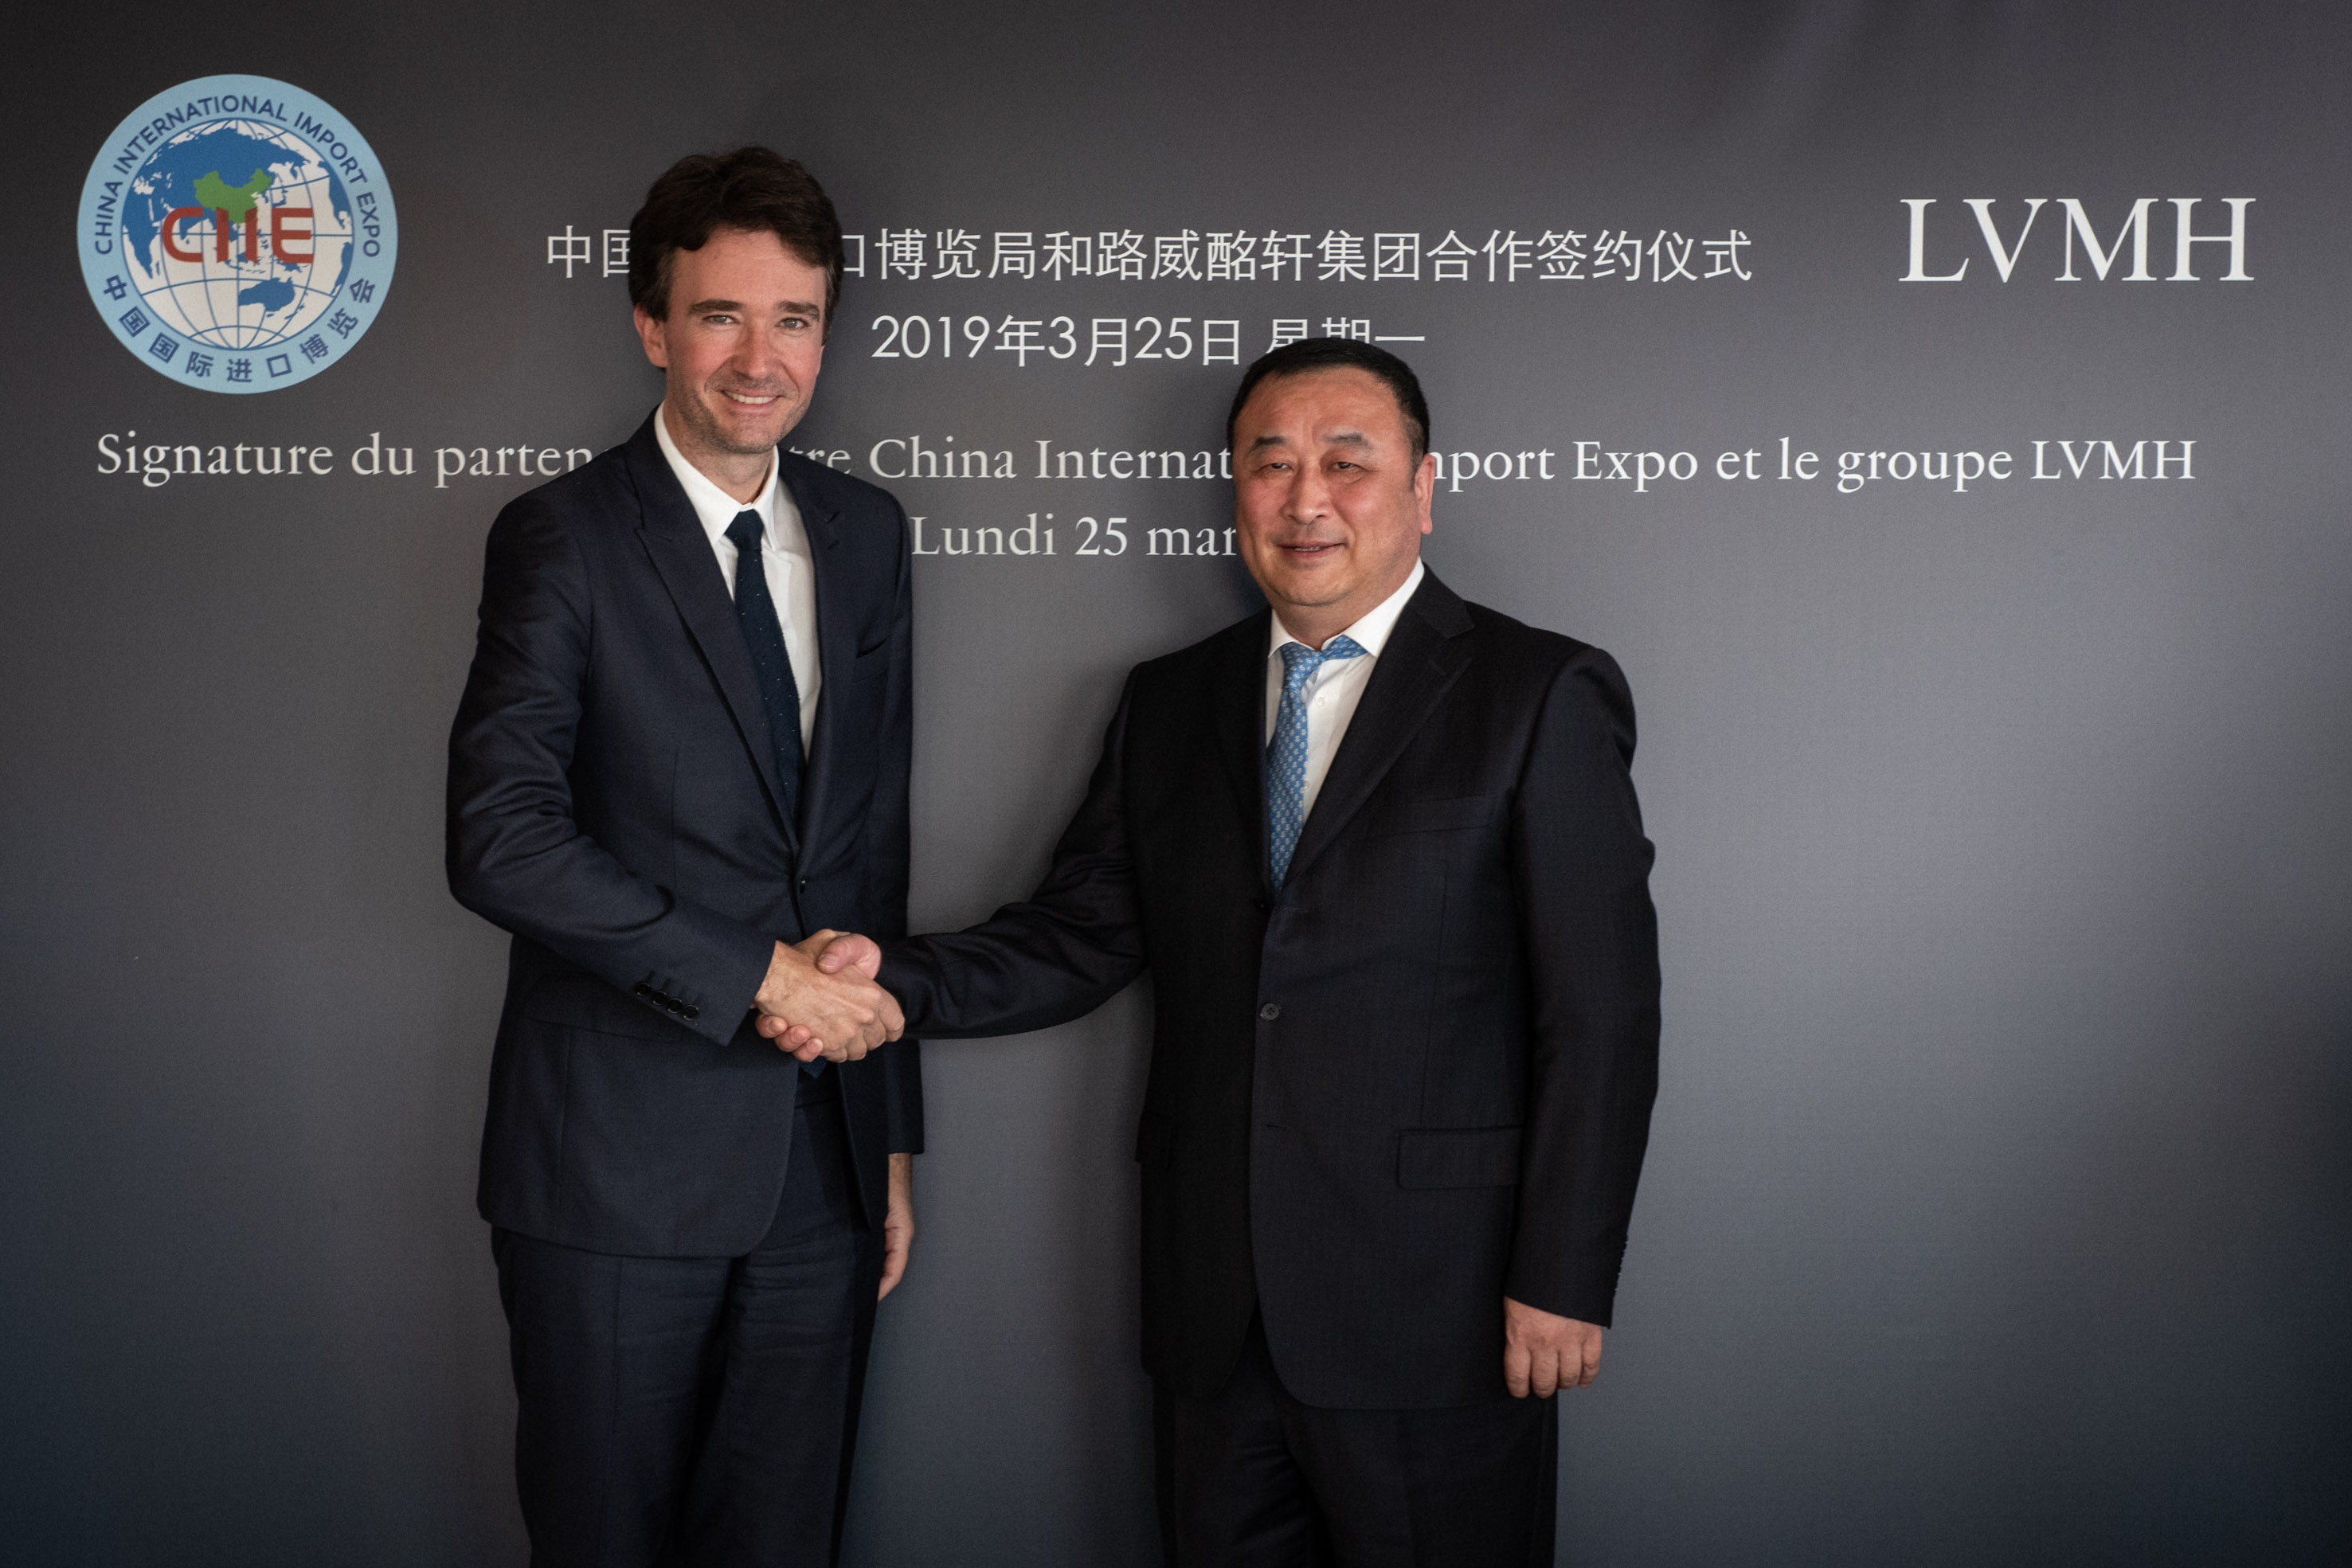 LVMH Group director Antoine Arnault signed an agreement with Sun Chenghai, representative of the Bureau of the China International Import Expo in Paris on March 25, 2019.  Photo: Gabriel de La Chapelle